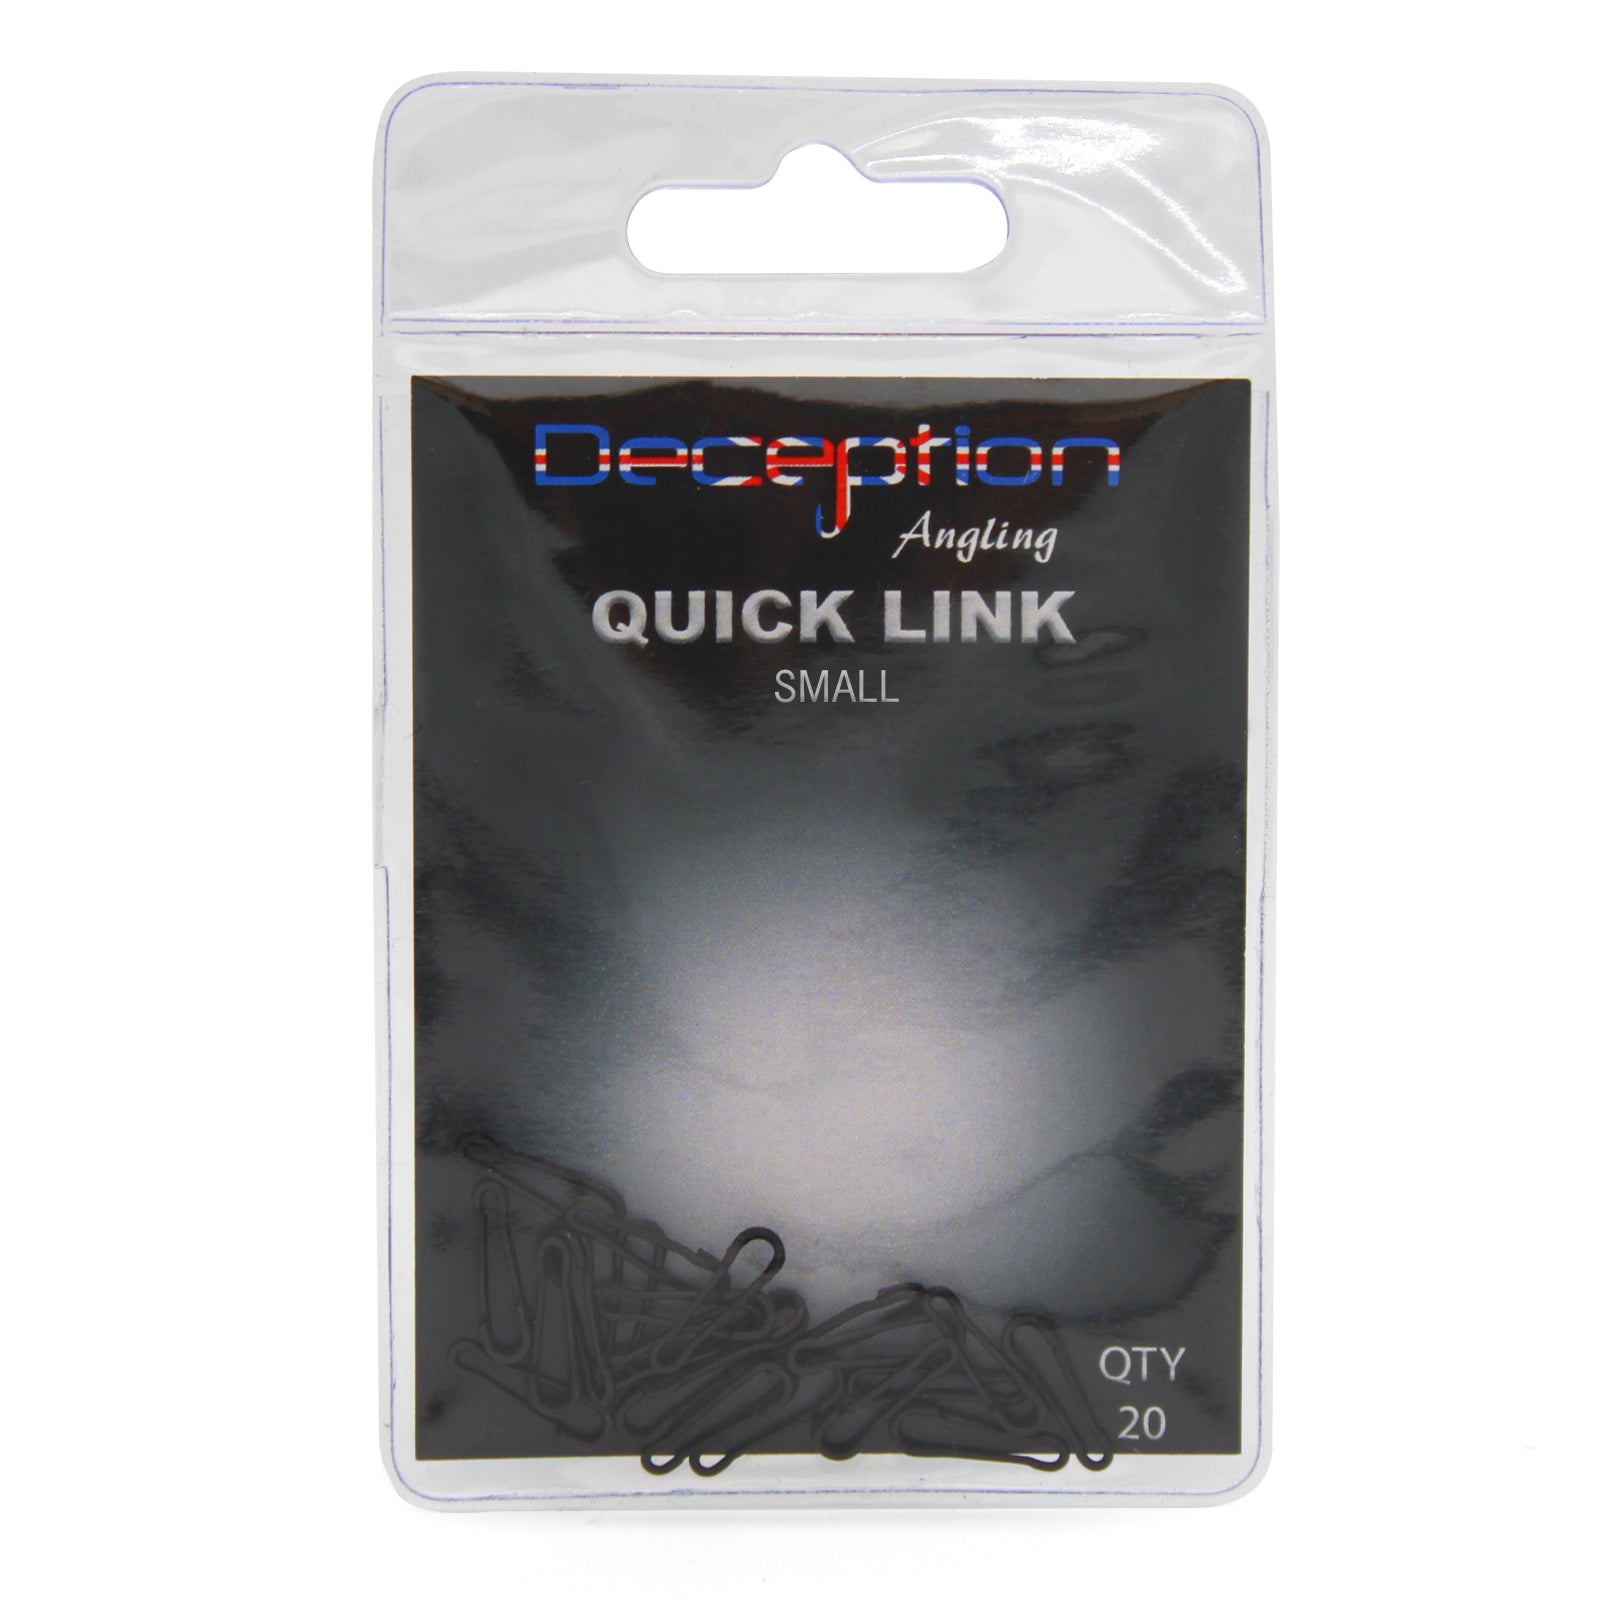 Deception Angling Quick Link Small for Fishing